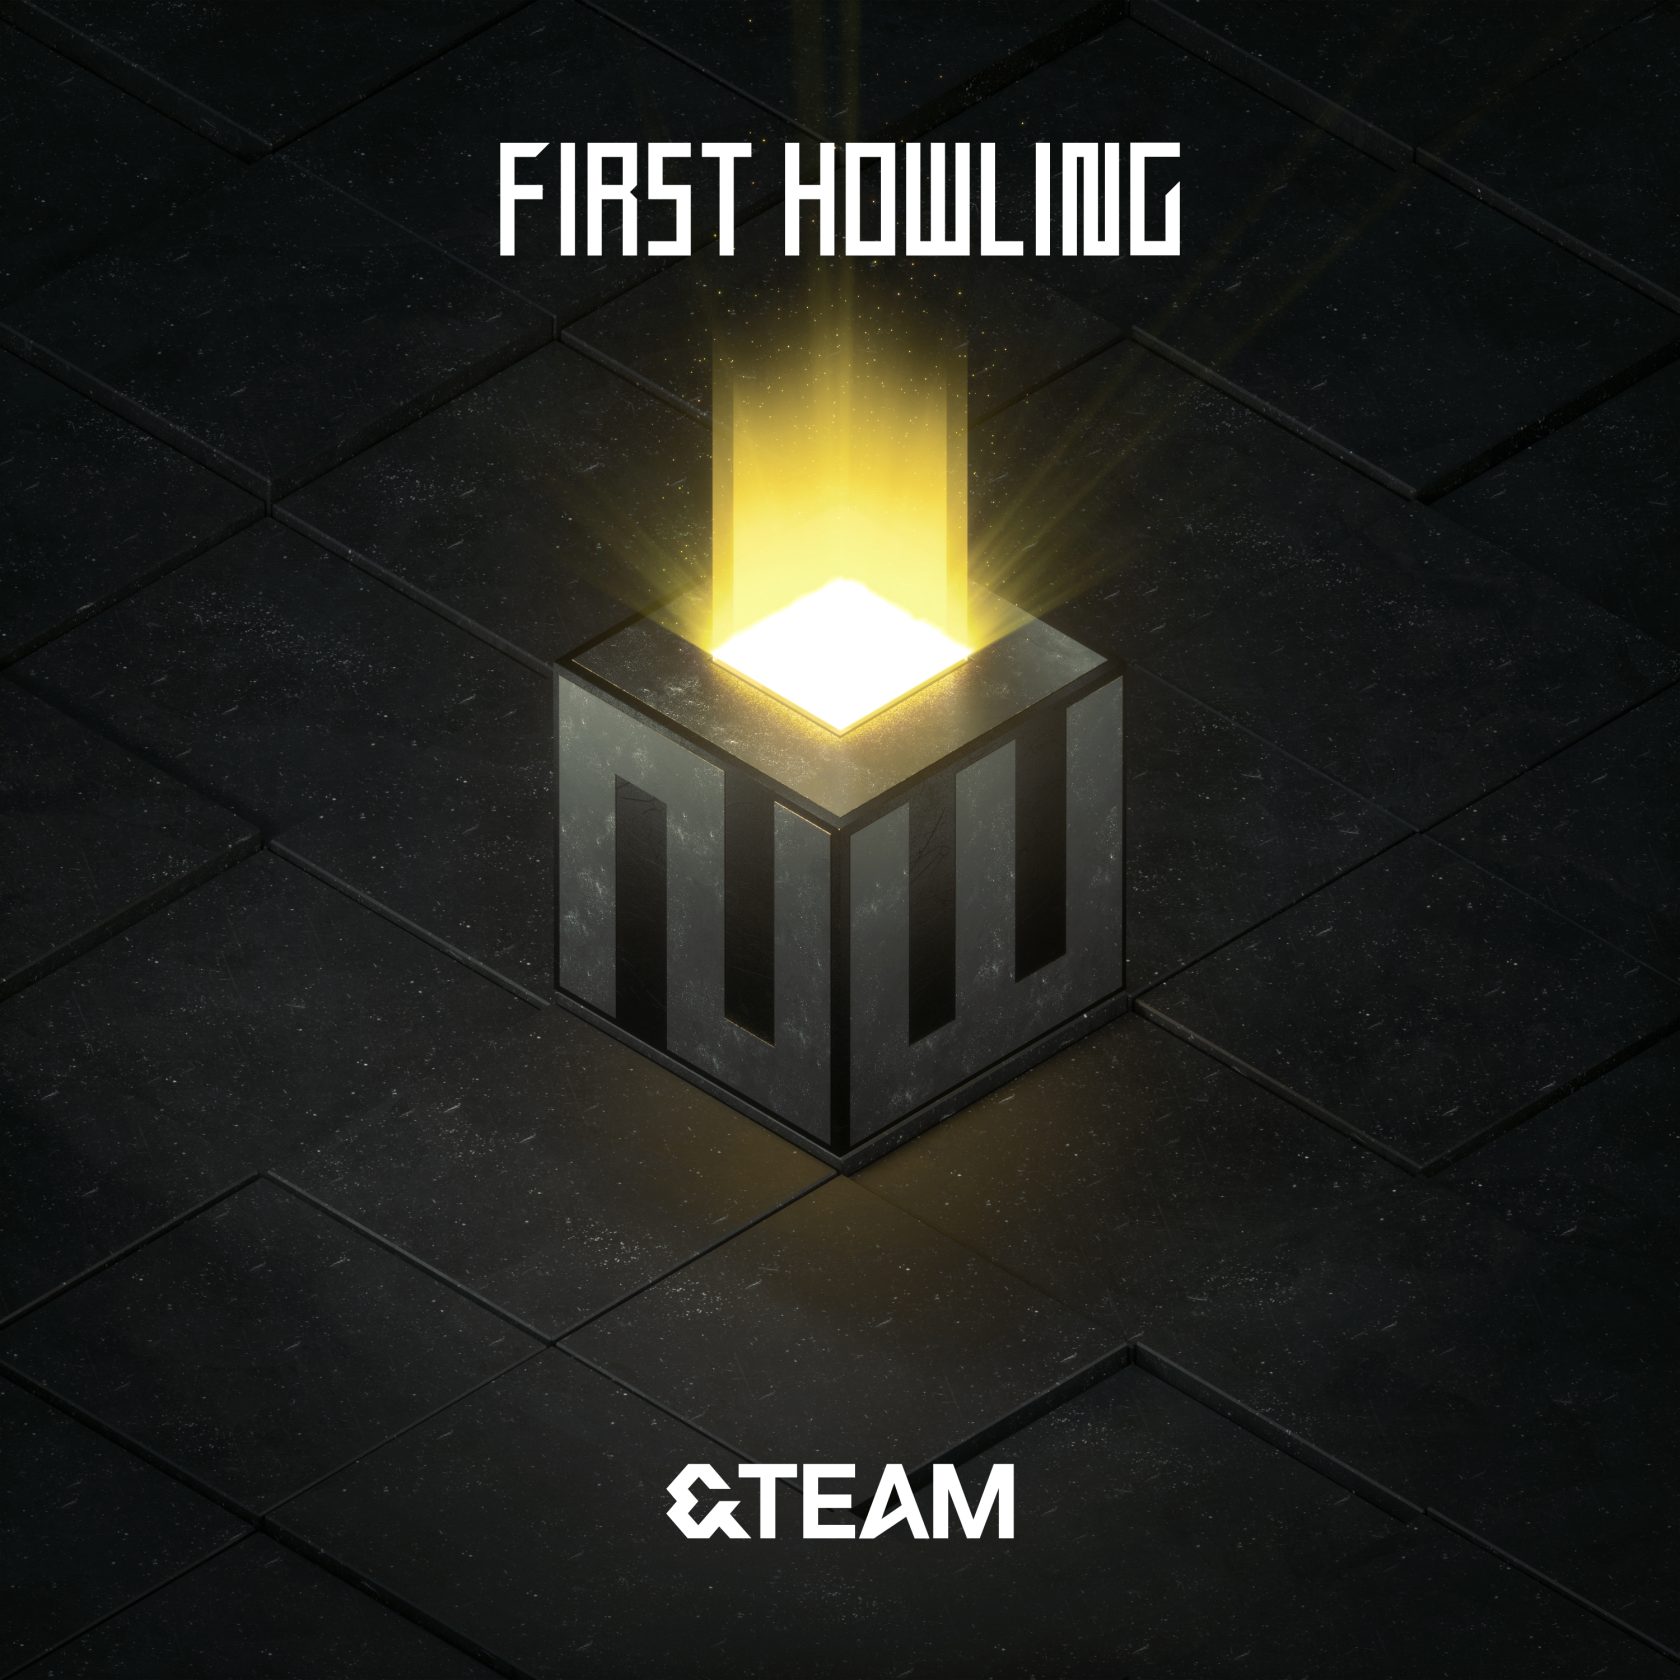 &TEAM「First　Howling：NOW」のジャケット（C）HYBE　LABELS　JAPANTEAM「First　Howling：NOW」のジャケット（C）HYBE　LABELS　JAPAN